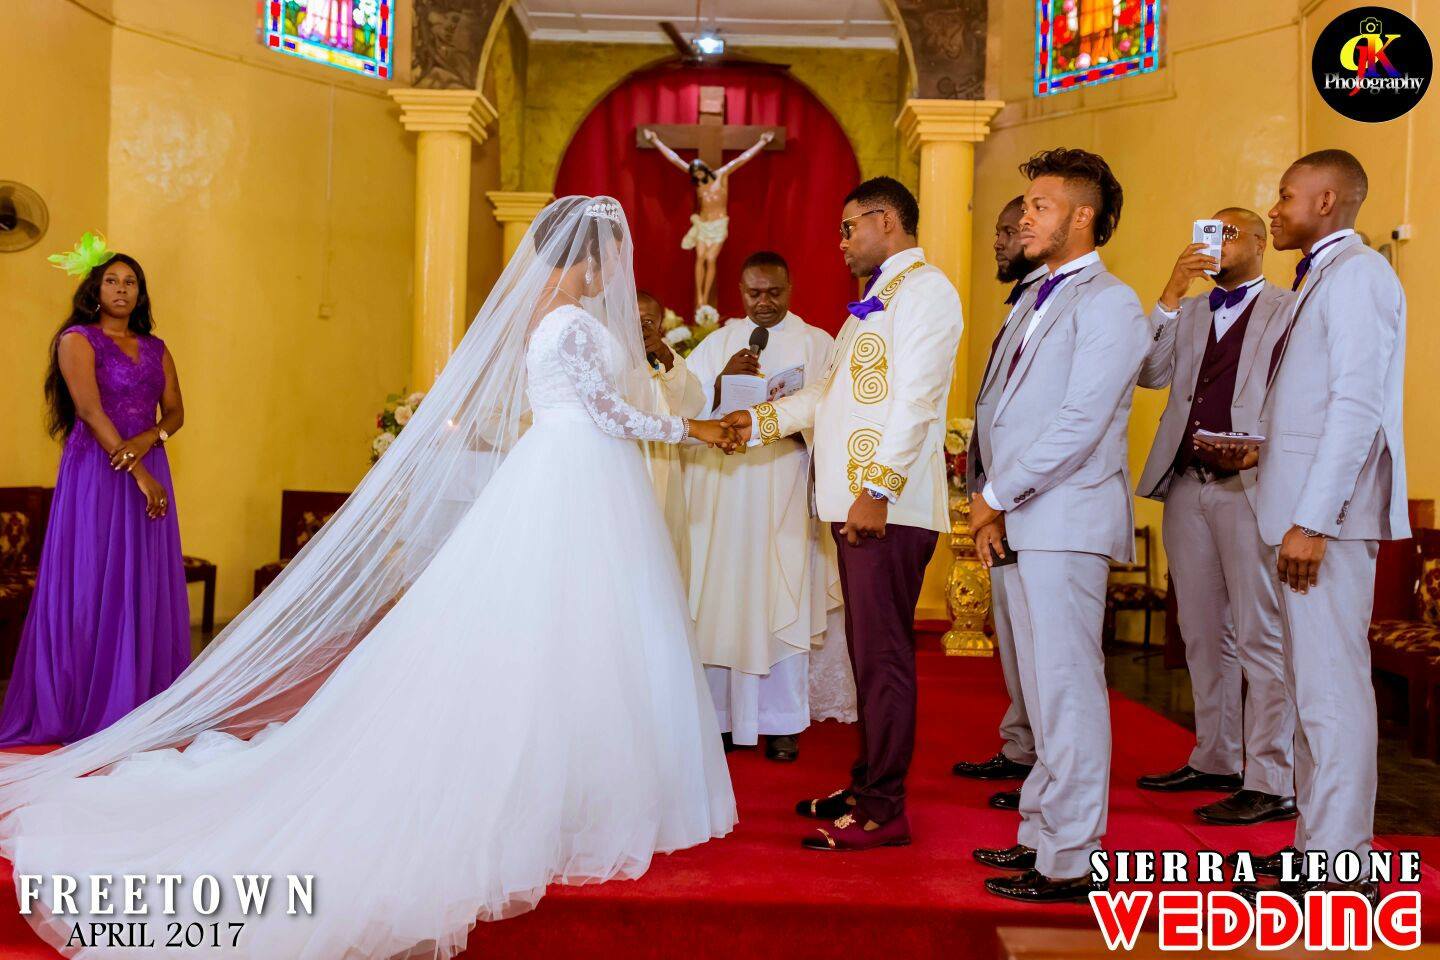 EXCLUSIVE CELEBRITY INTERVIEW - DADDYSAJ AND MARIAMA'S WEDDING